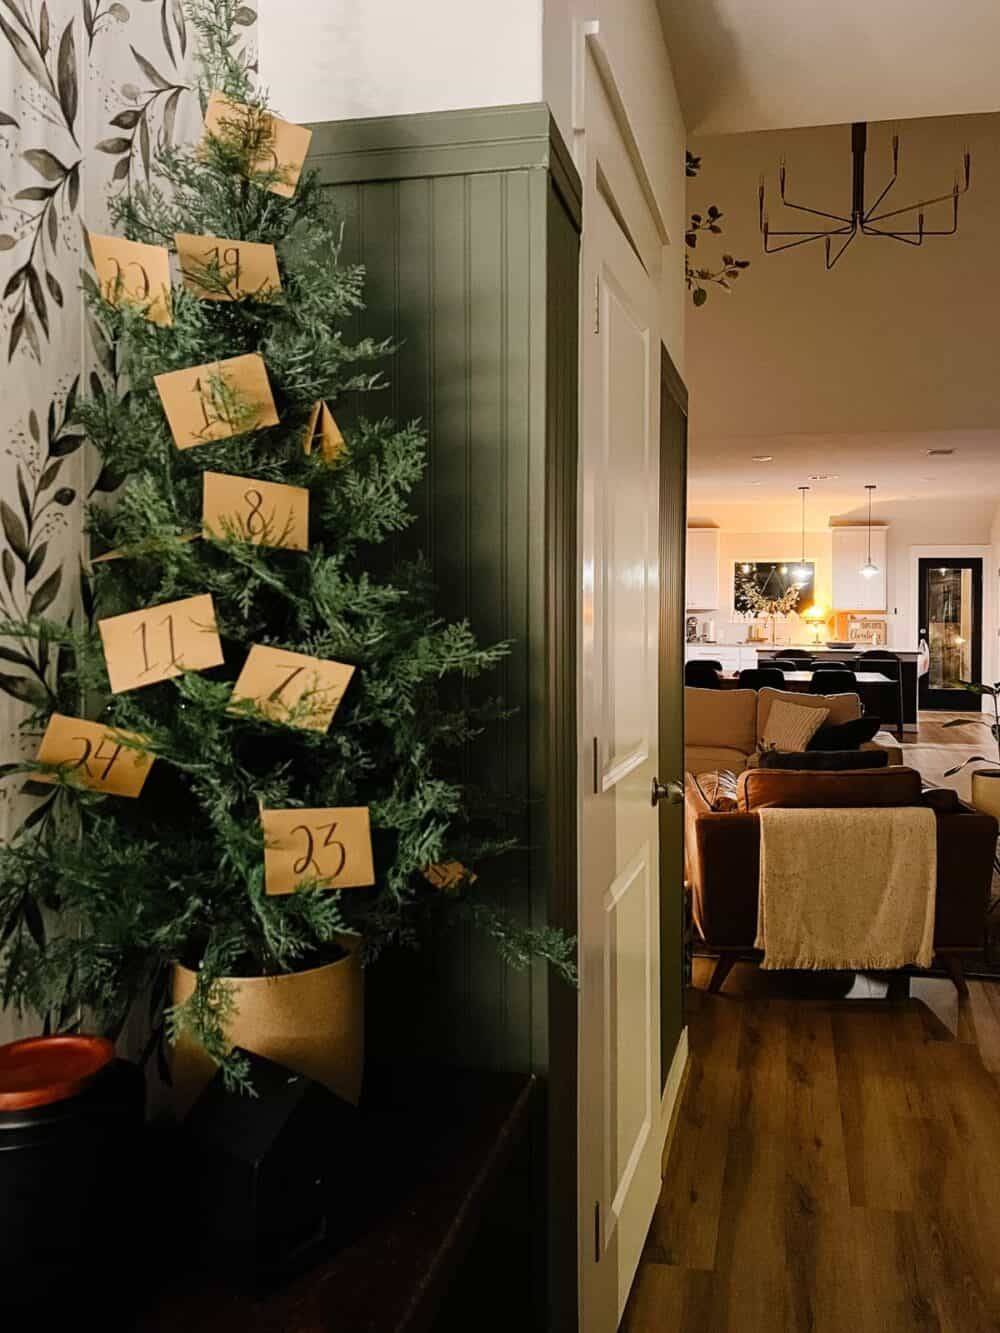 A tabletop tree with numbered envelopes on it 